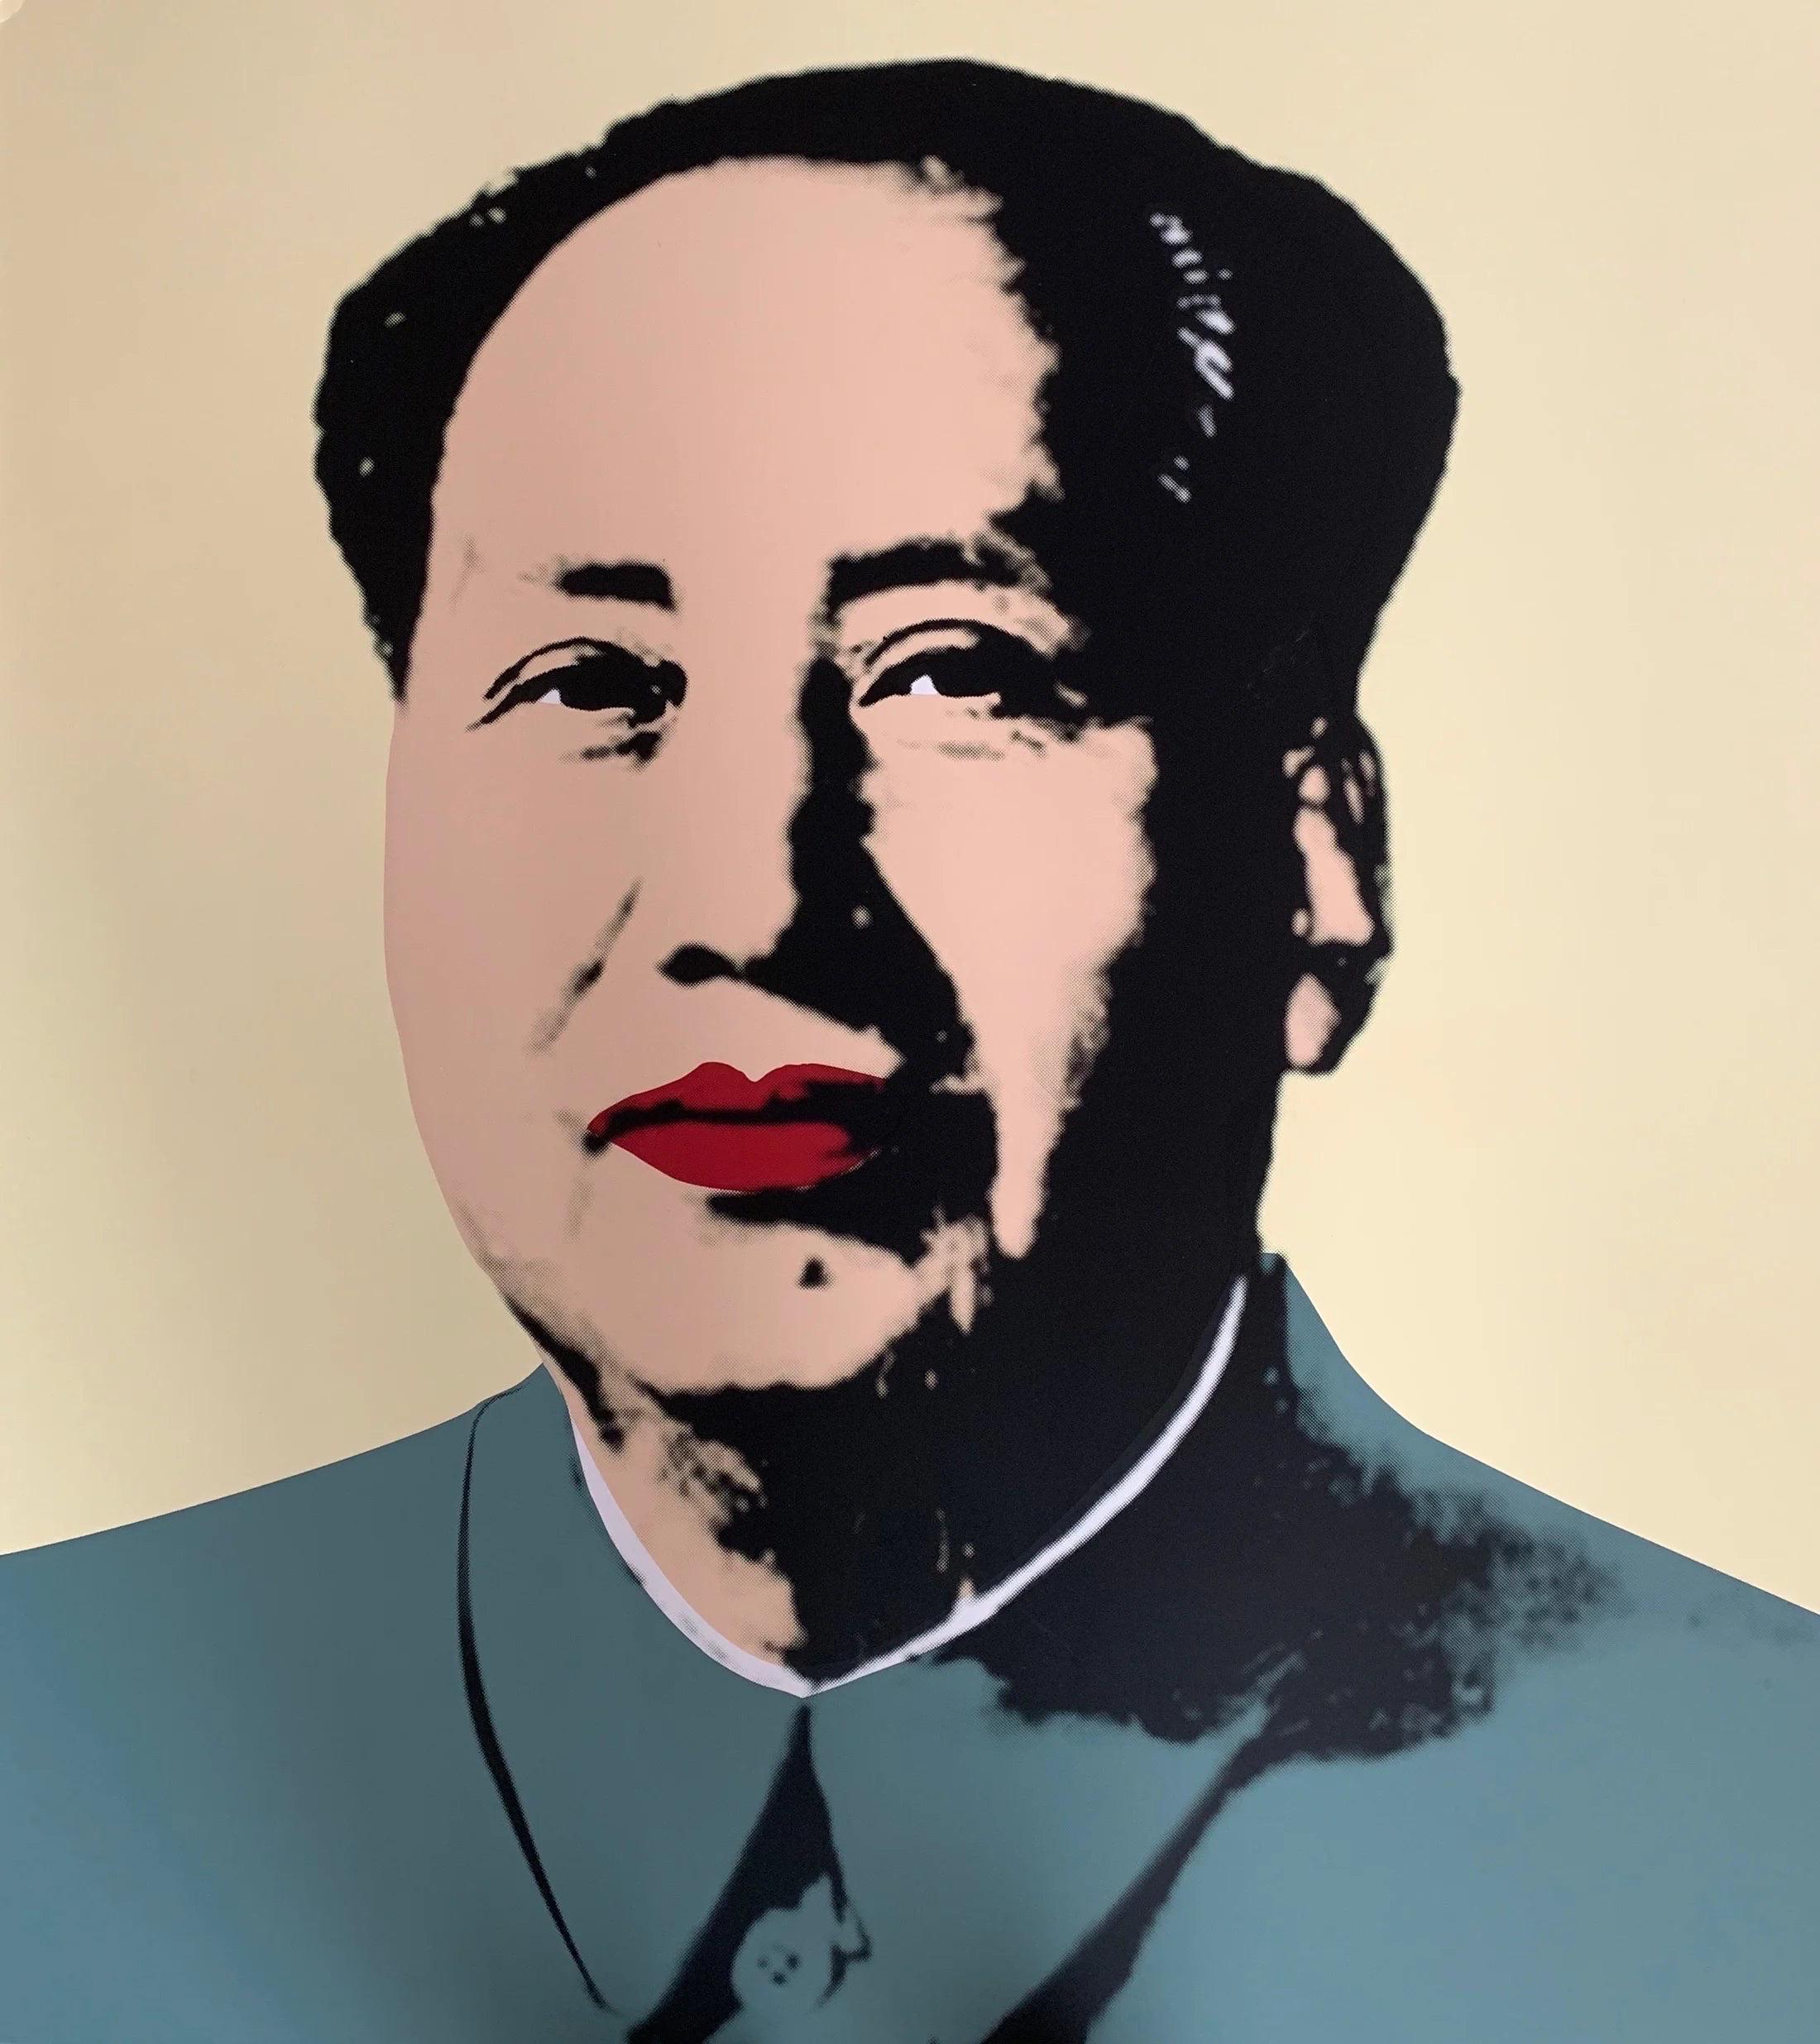 Sunday B. Morning (Andy Warhol) Mao Yellow

Silkscreen print from photo negatives of original Factory Additions stencil on museum quality board. Printed with the highest quality archival inks

75 x 85 cm  29.52 x 33.46 in 

Andy Warhol lithograph by